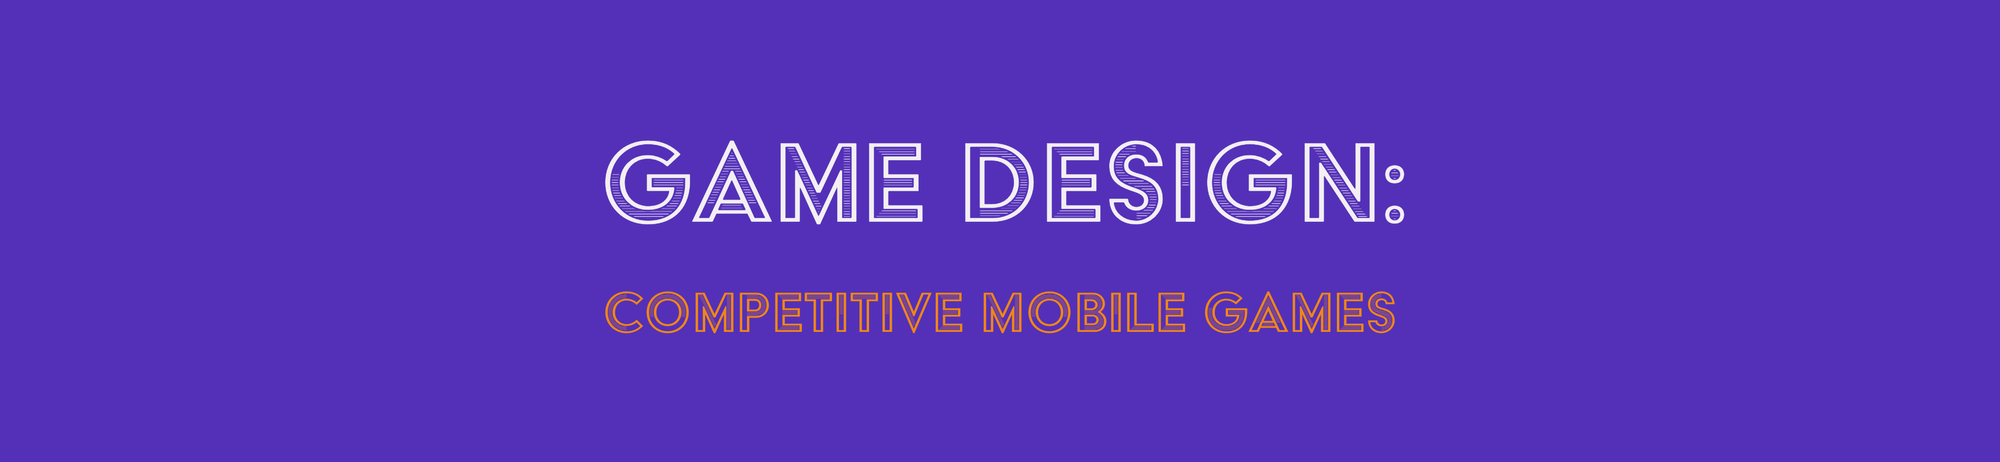 Game Design: Competitive Mobile Games